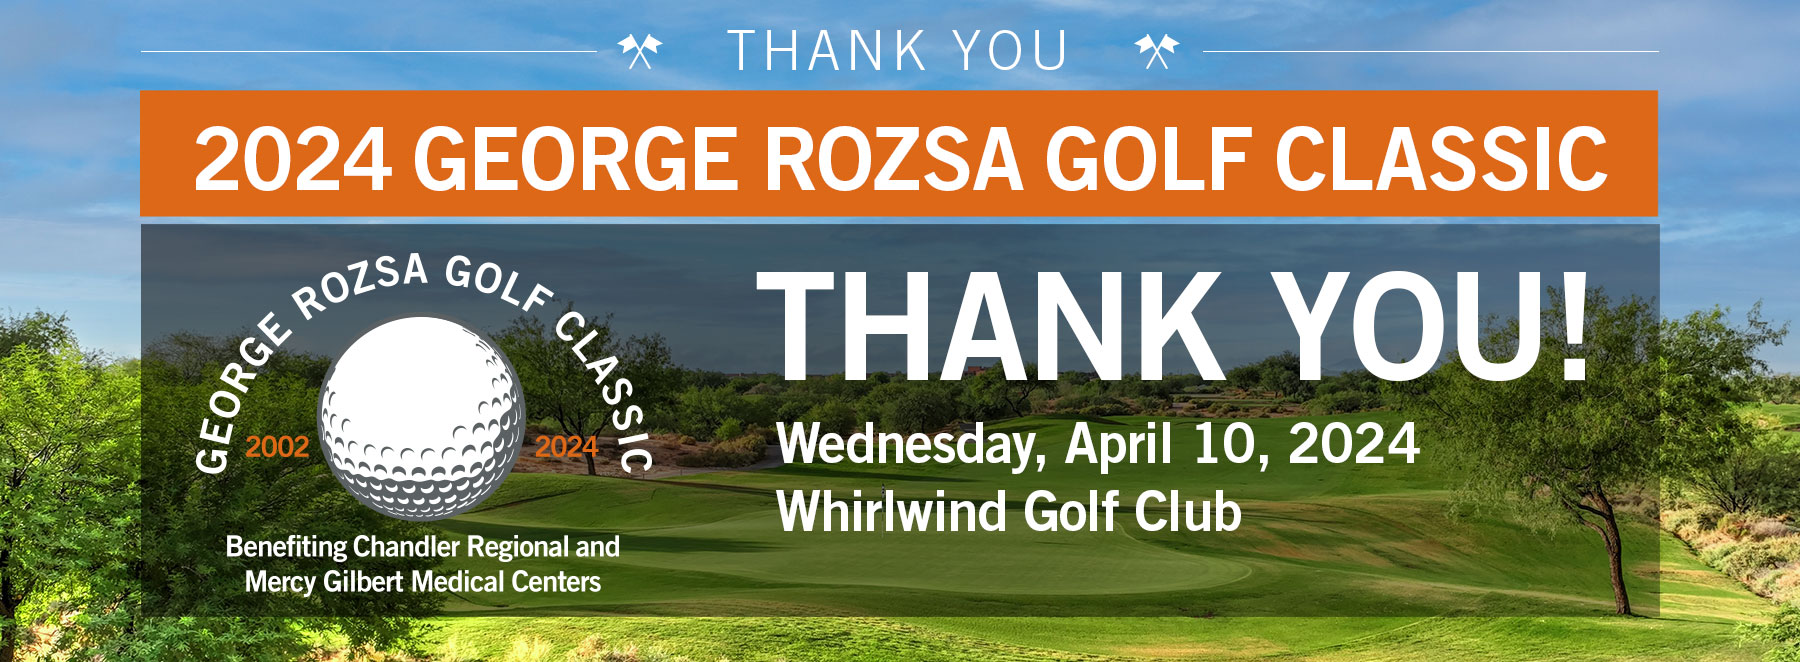 George Rozsa Golf Classic 2024 - Thank You Banner